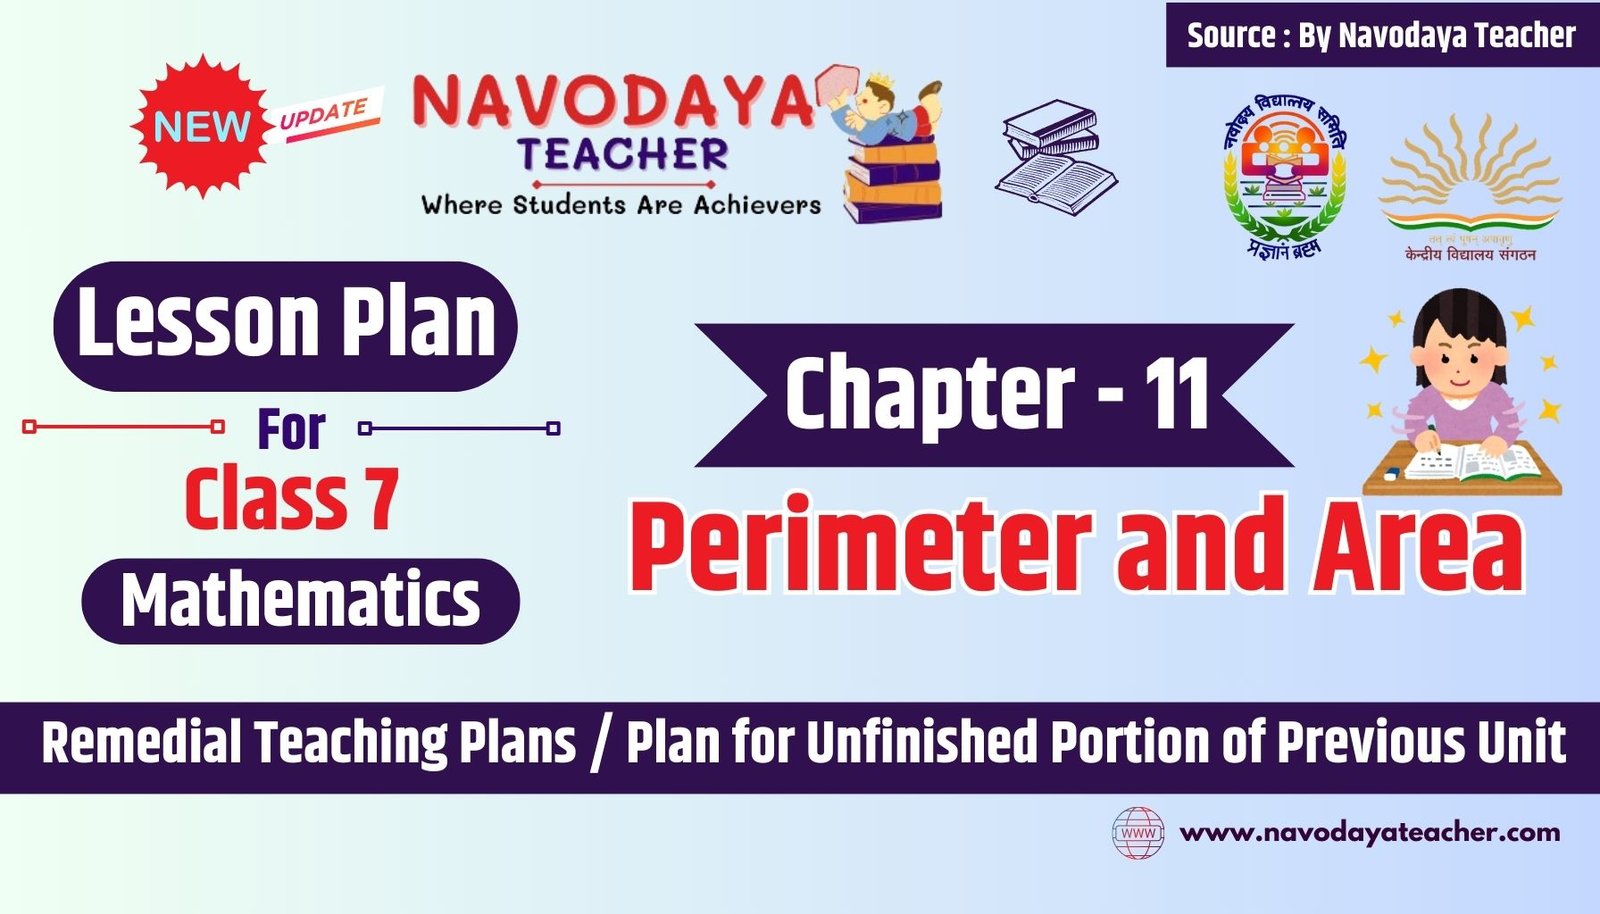 CBSE Class 7 Chapter- 11 Perimeter and Area Lesson Plan in PDF